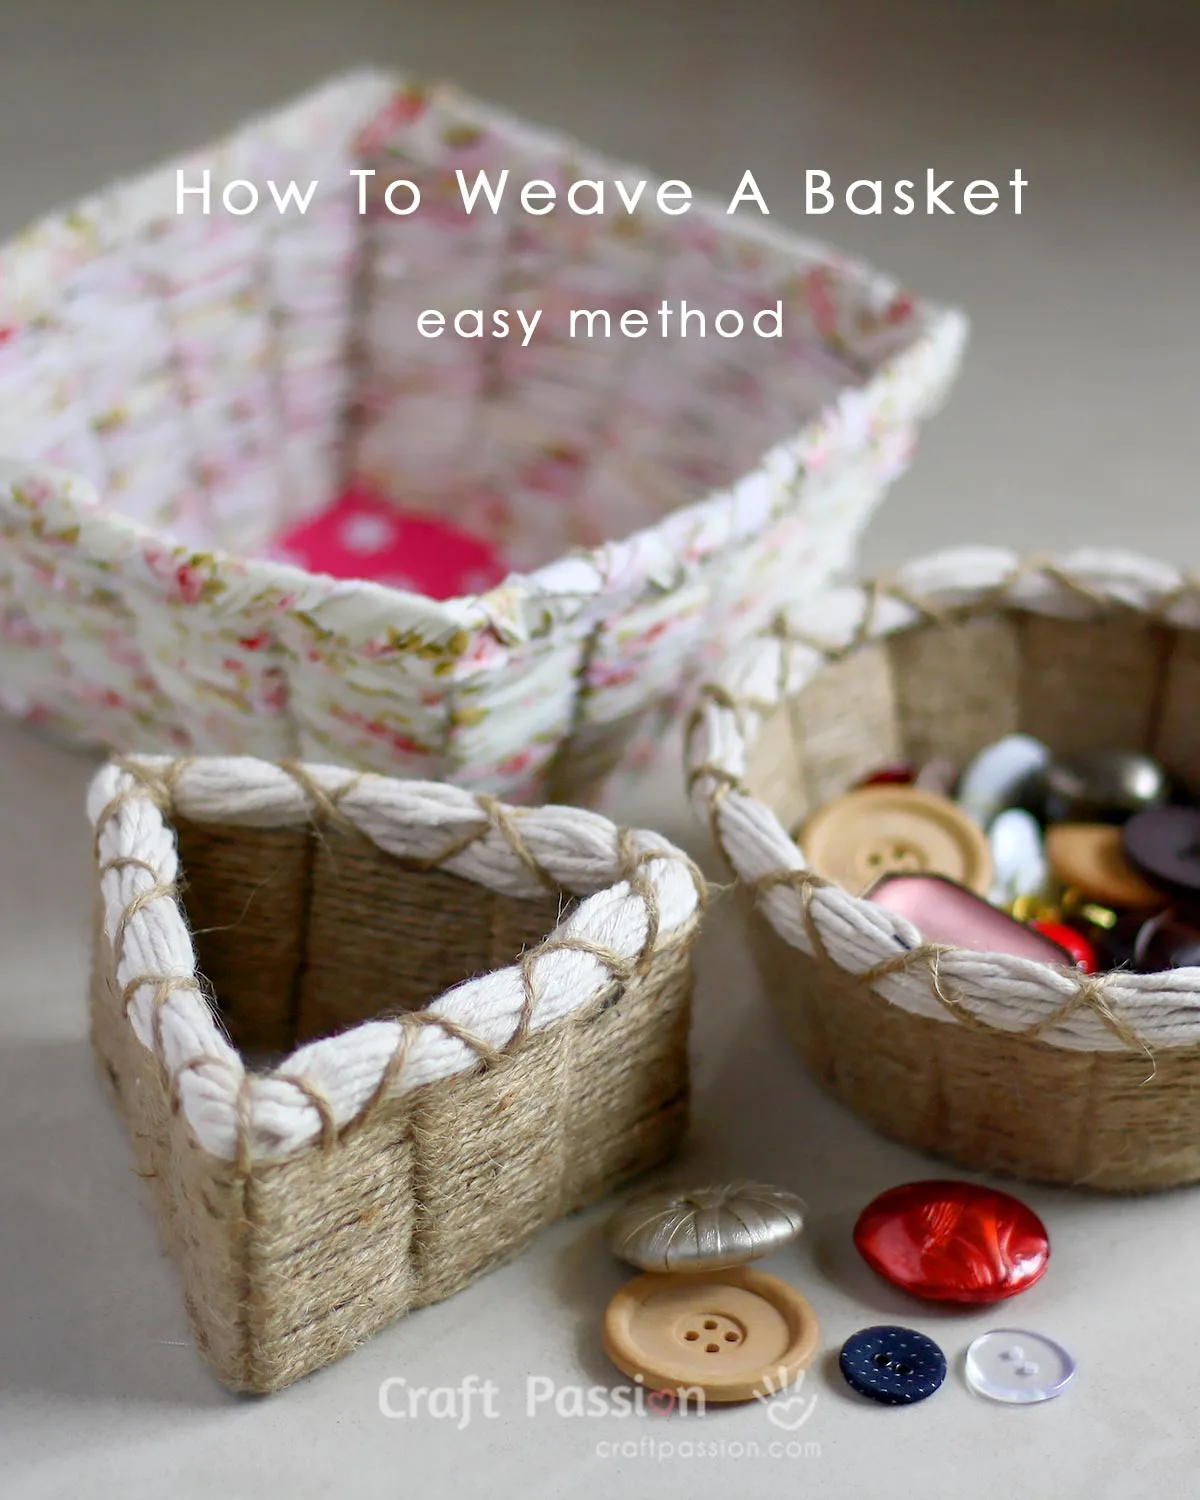 Get the tutorial on how to weave basket on cardboard. Free template for you to download and make this easy basket weaving possible.